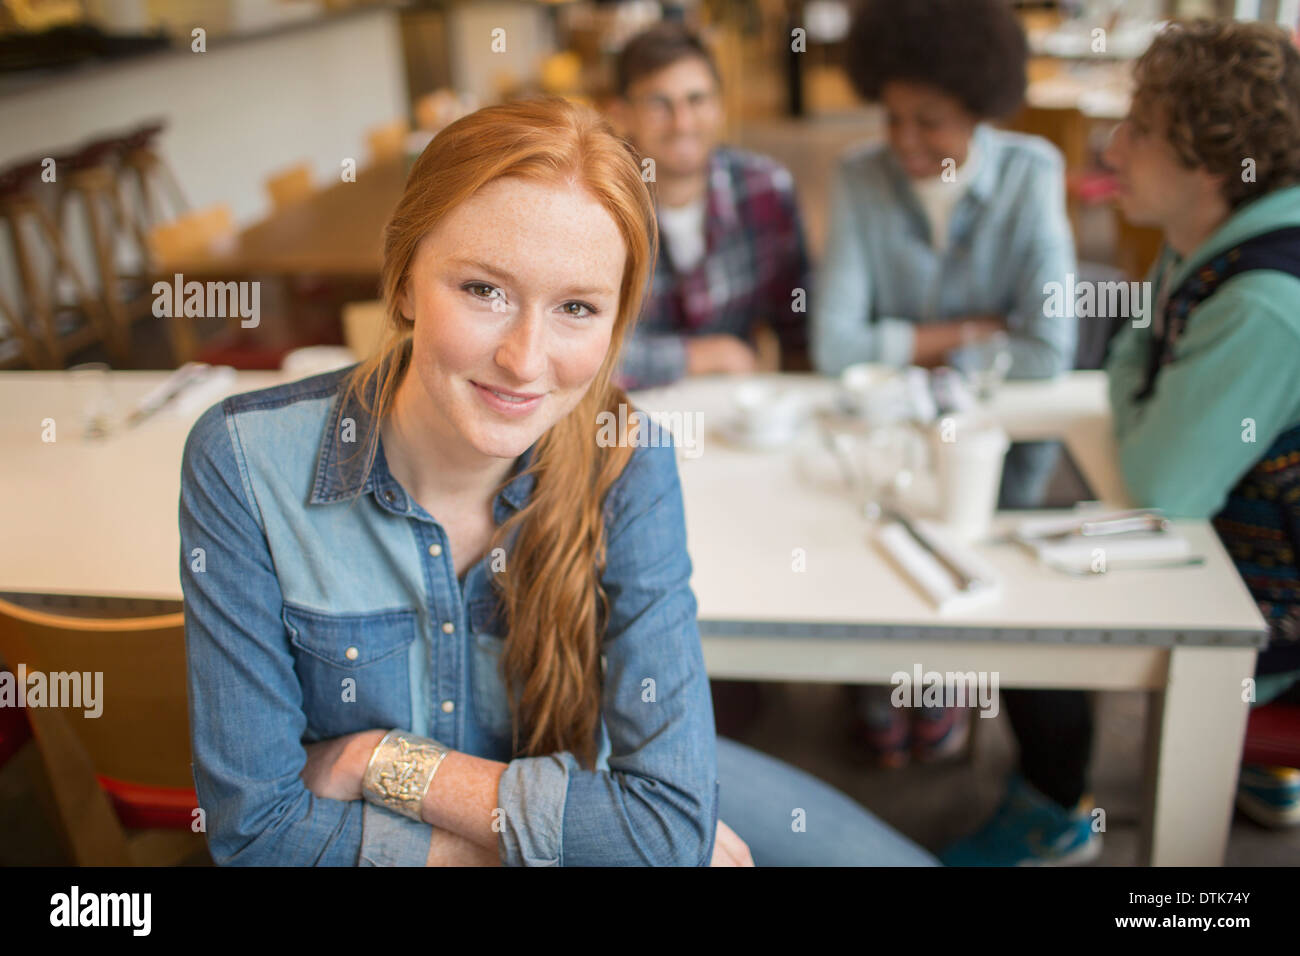 Woman sitting with friends in cafe Stock Photo